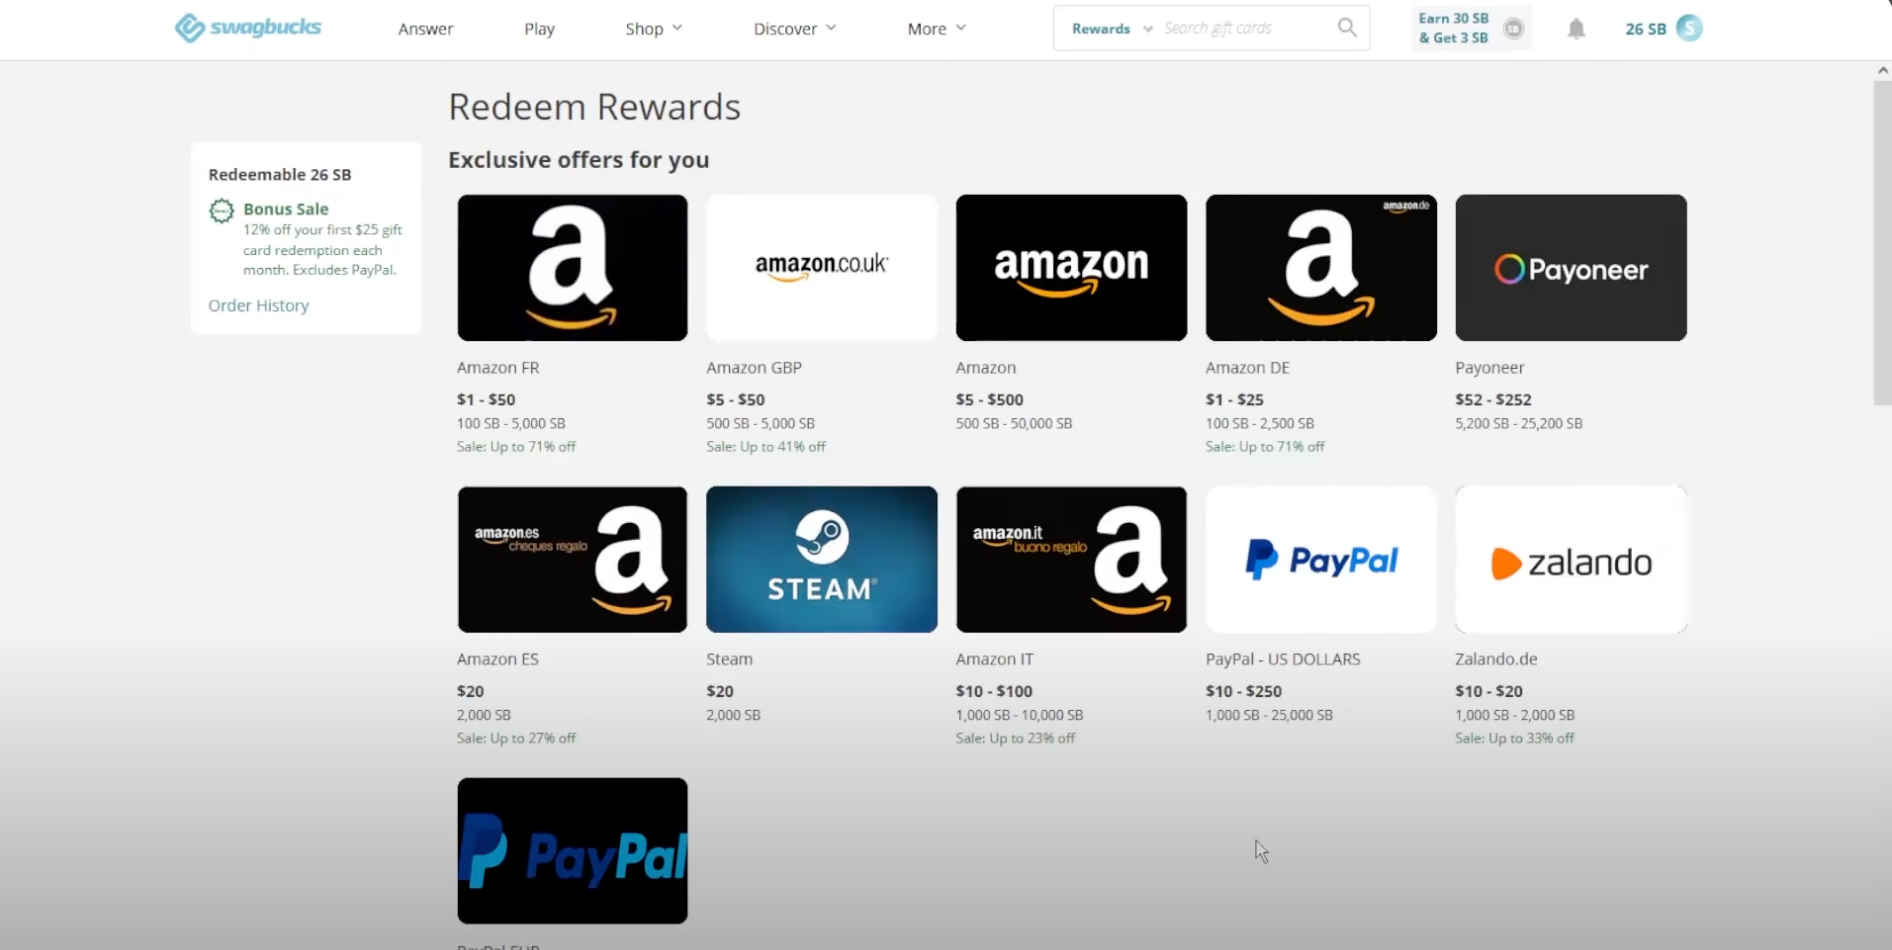 Screenshot of Swagbucks "redeem rewards" page, where user can redeem rewards for Amazon giftcard.